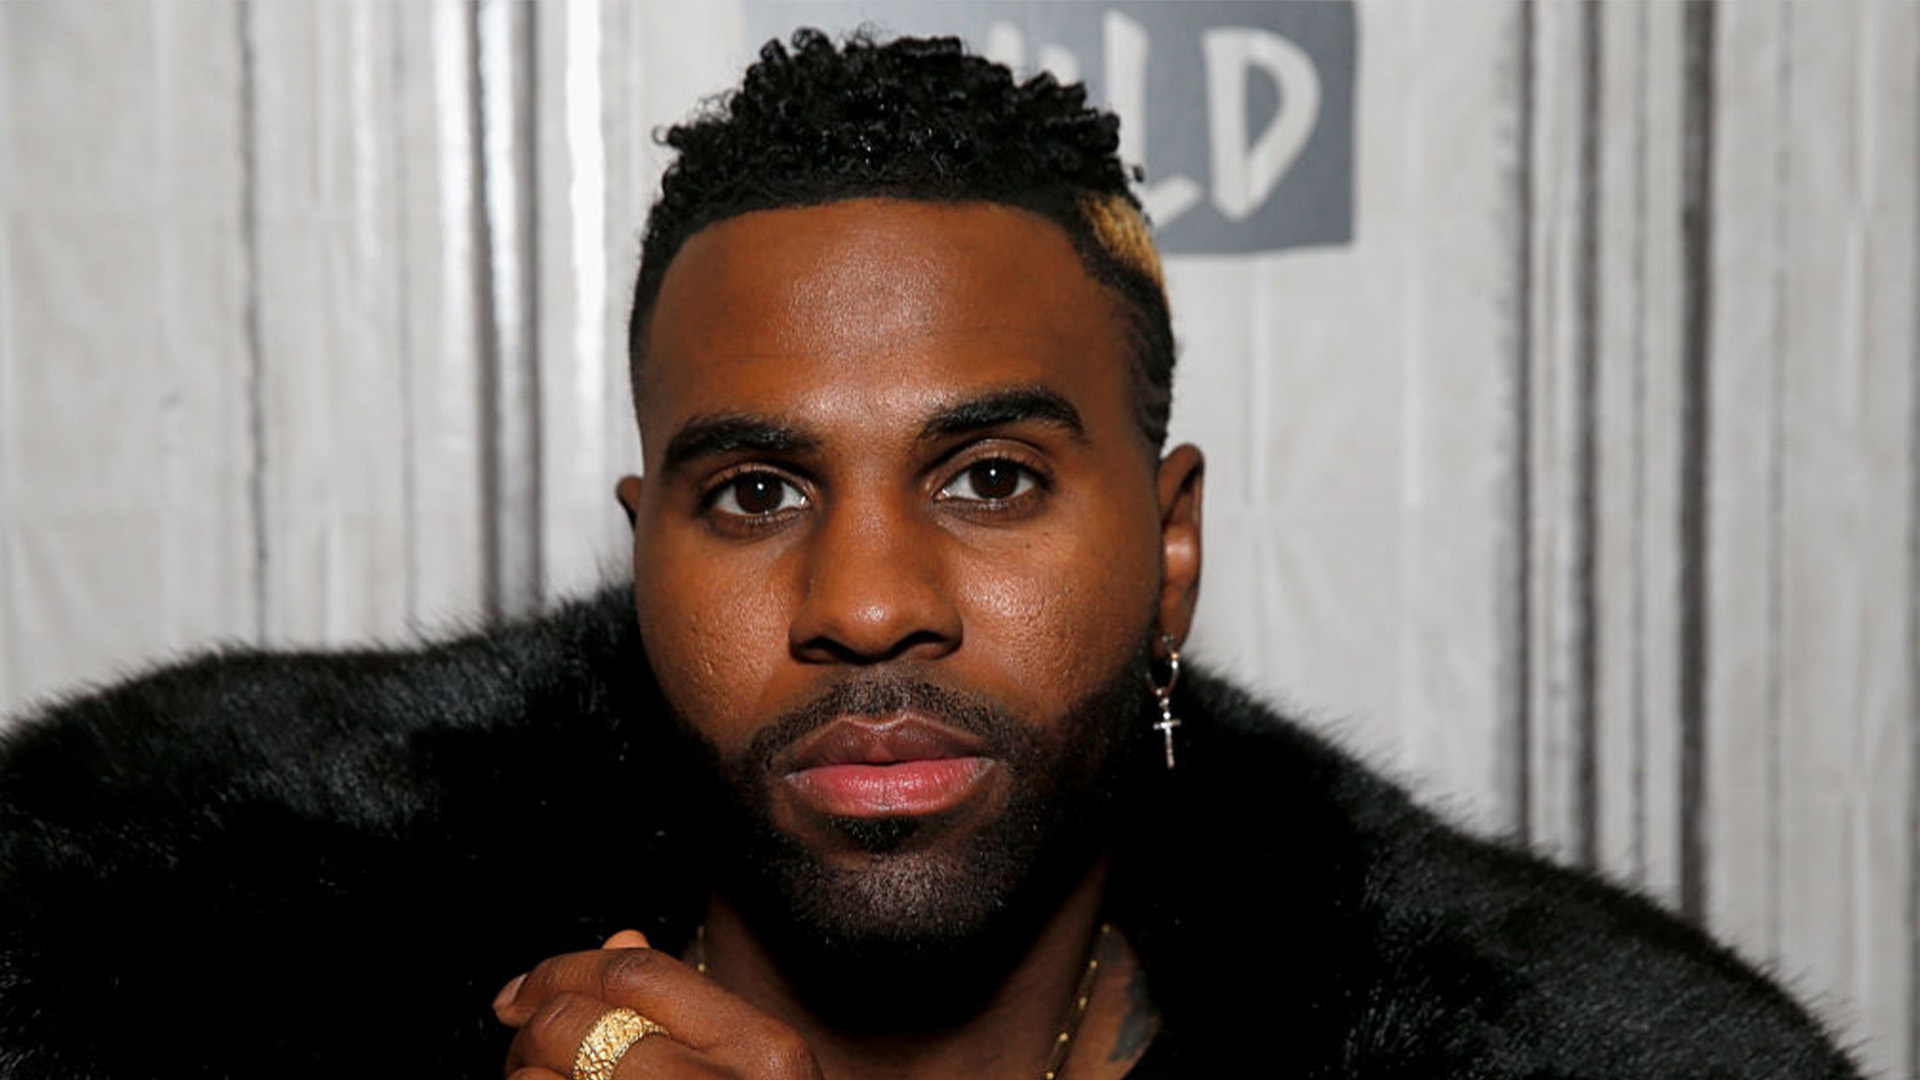 Jason Derulo's $5K Tip Helps Pay A Waiter's Tuition For A College Semester